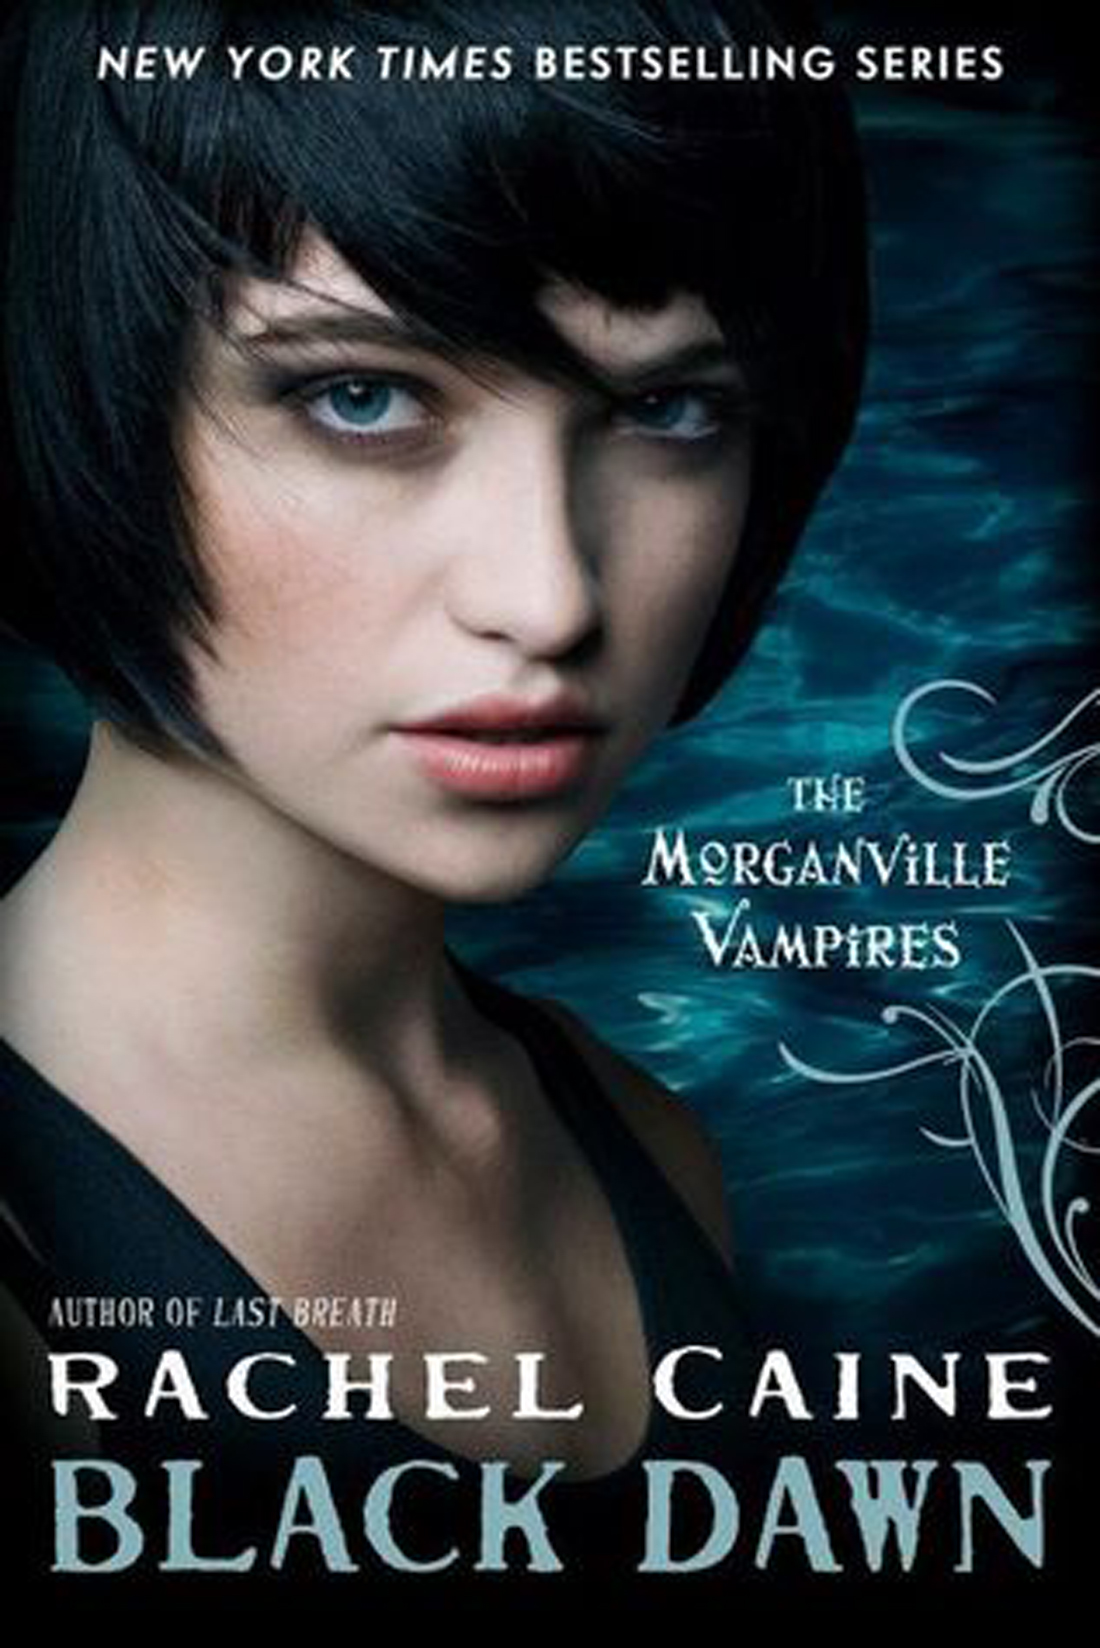 The 12th in Caine’s Morganville Vampires series is interesting but could have been richer.